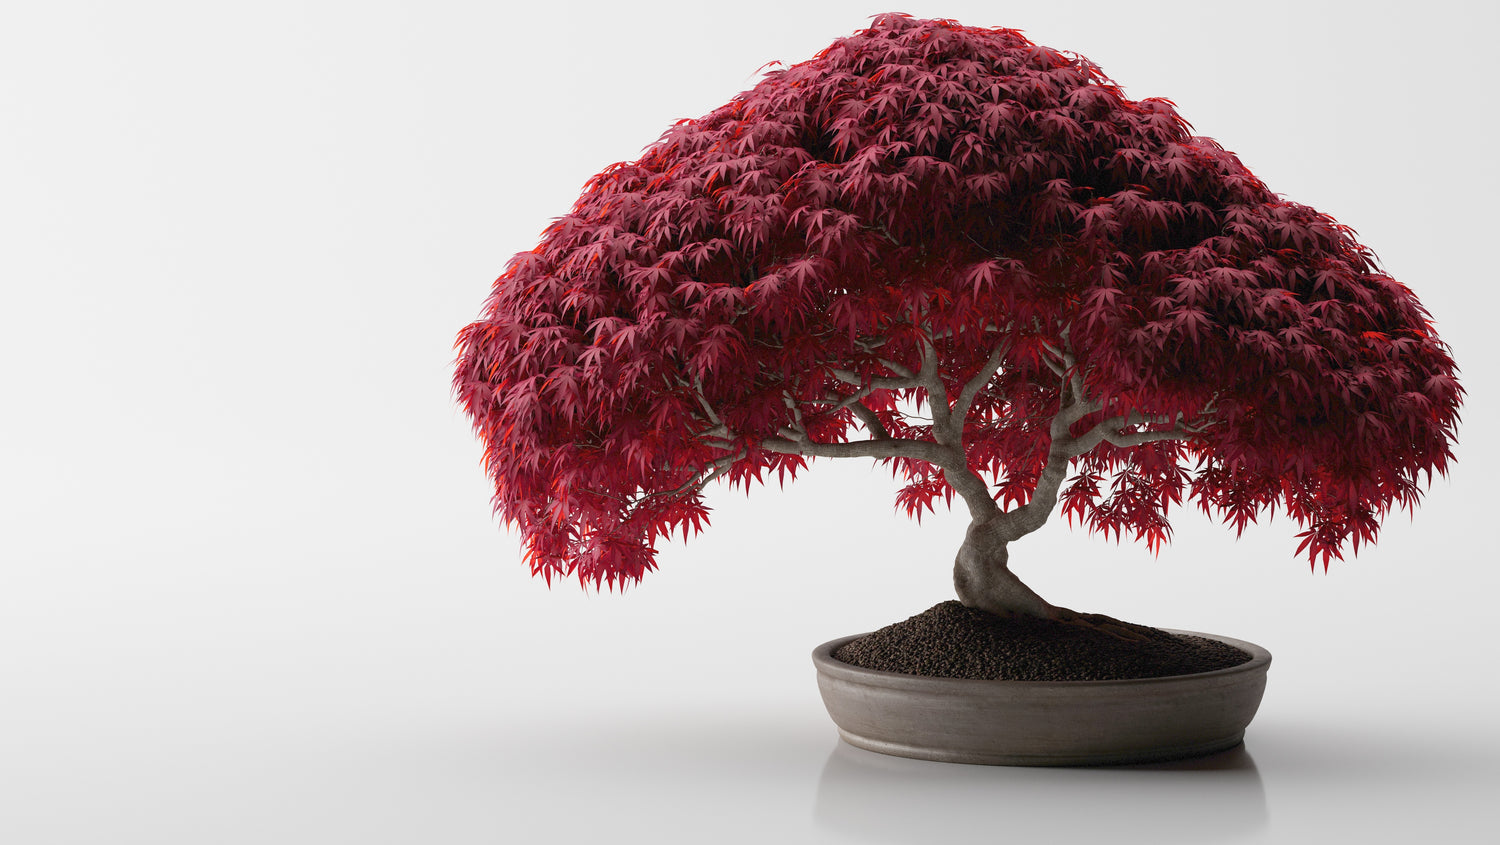 Miniature Marvels: The Top 10 Dwarf Japanese Maple Trees